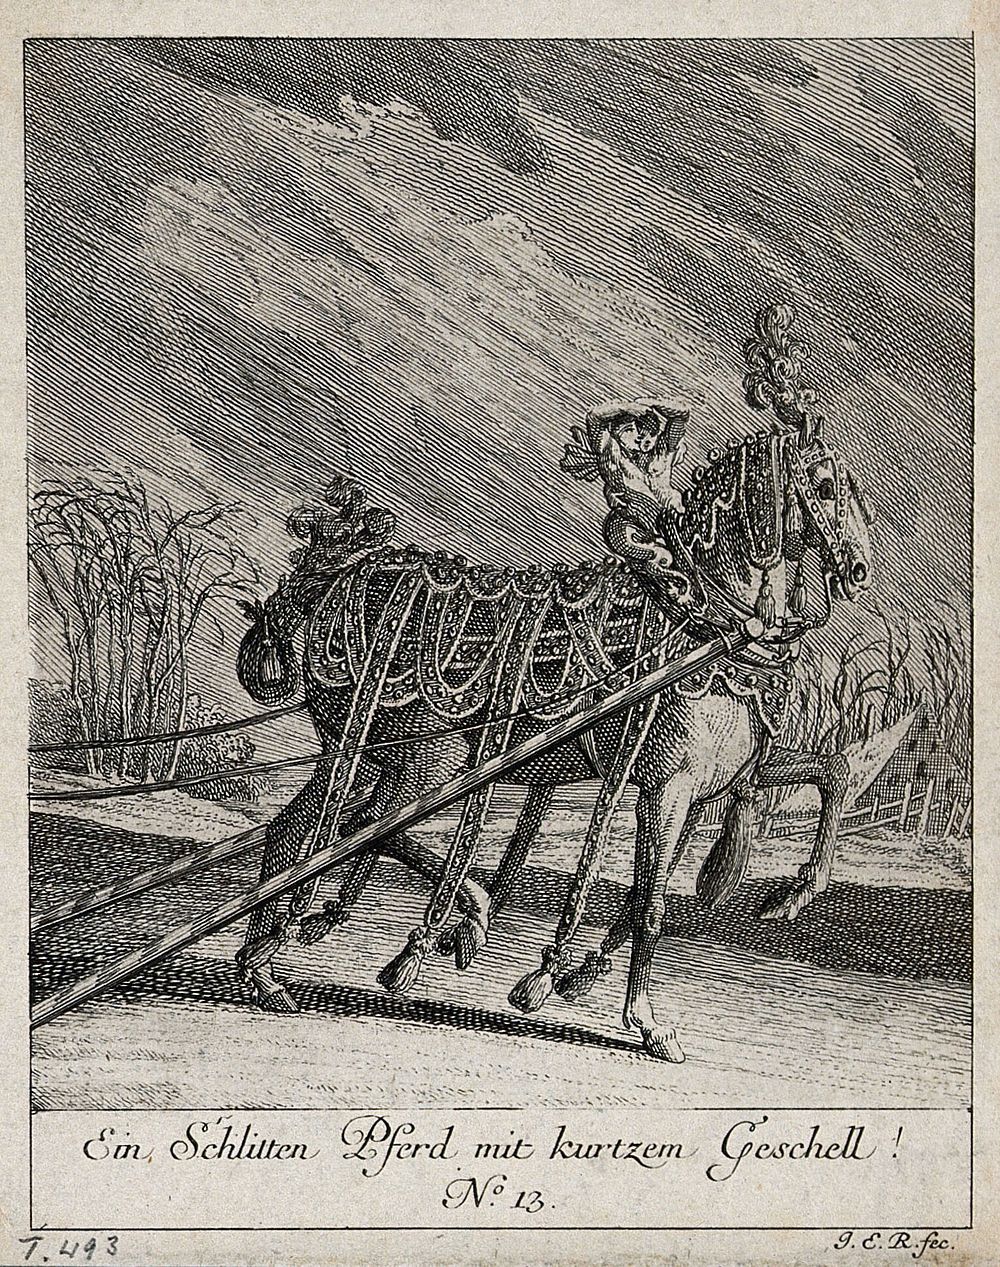 A sleigh-horse with an elaborately ornamented harness. Etching by J. E. Ridinger.